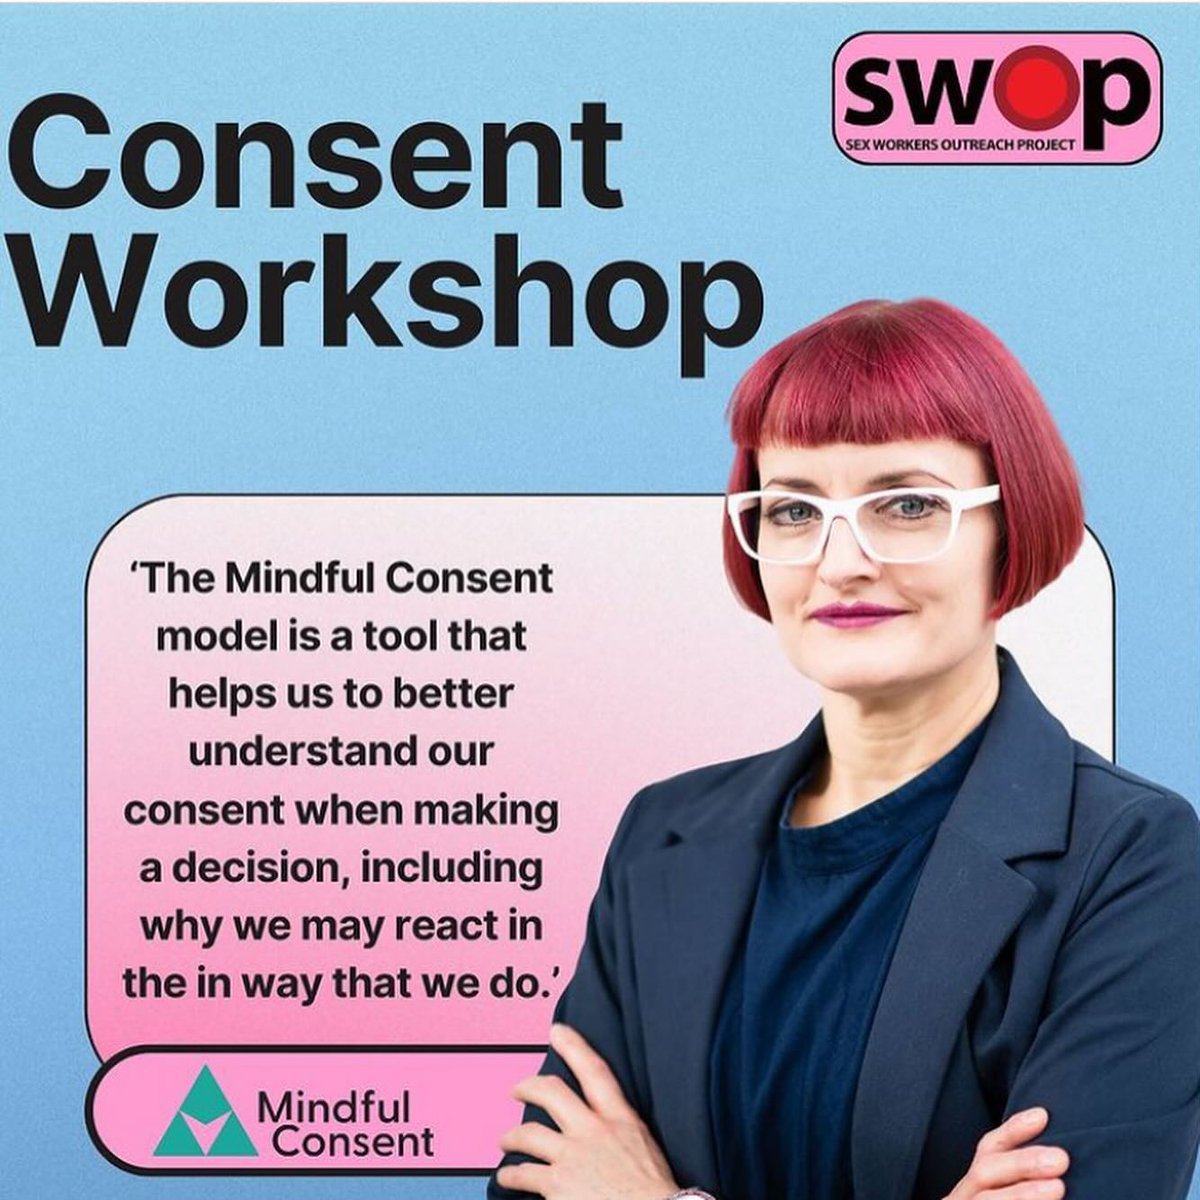 Excited to be working on my Mindful @consentmodel again in 2024! Today, I’m presenting to @SWOPnsw . Attendance is in person, or online. Registration is essential, for Sx workers only. Contact @SWOPnsw . #mindfulconsentmodel #consenteducation #consentmatters #consentculture